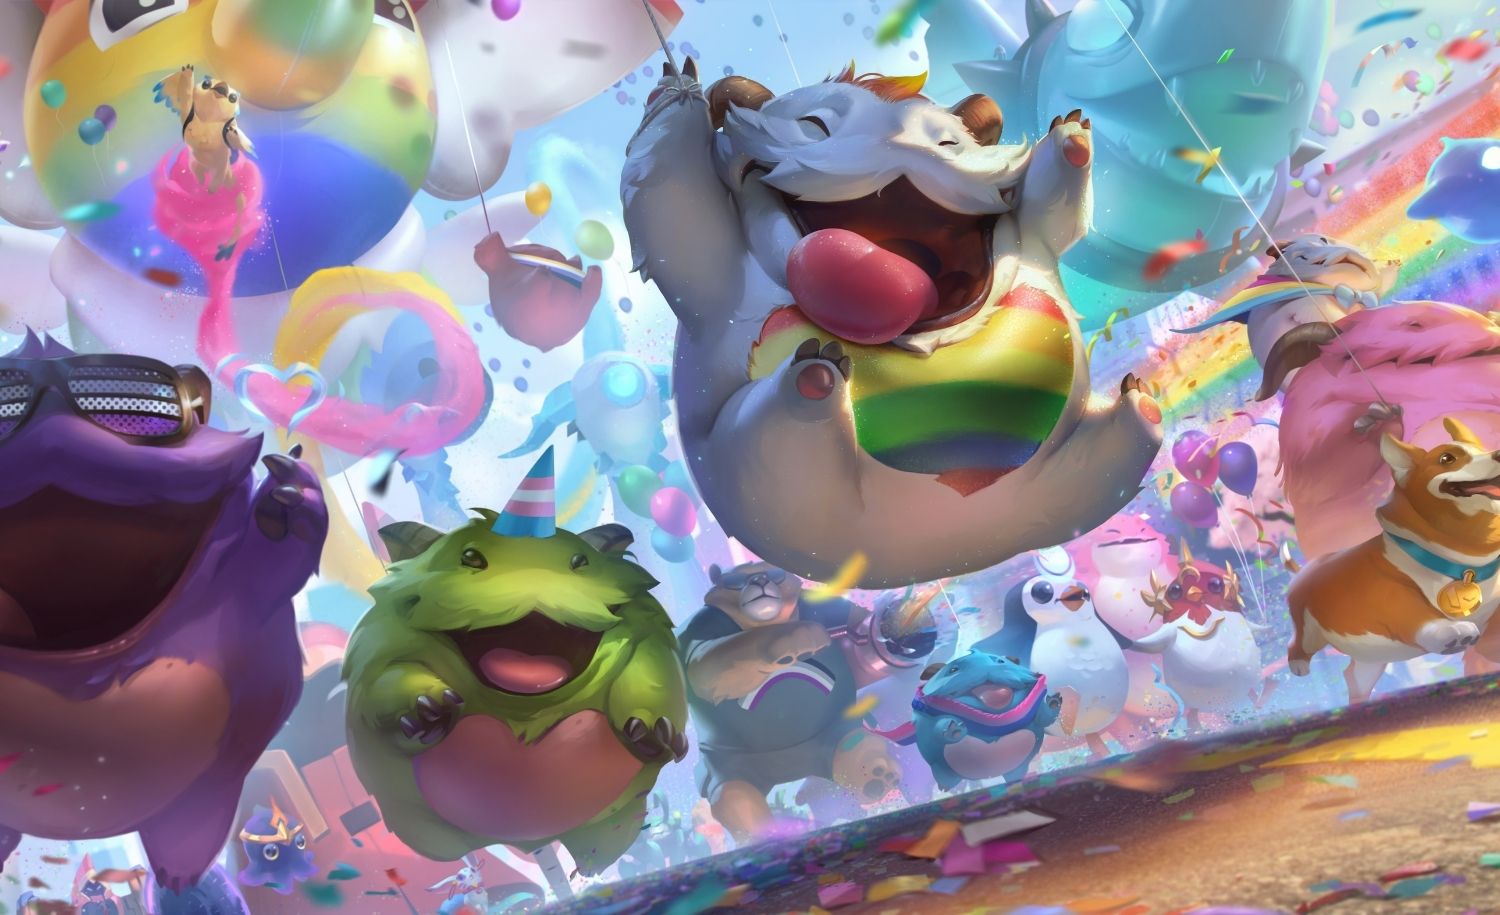 New collection in League of Legends merchandise store celebrates Pride